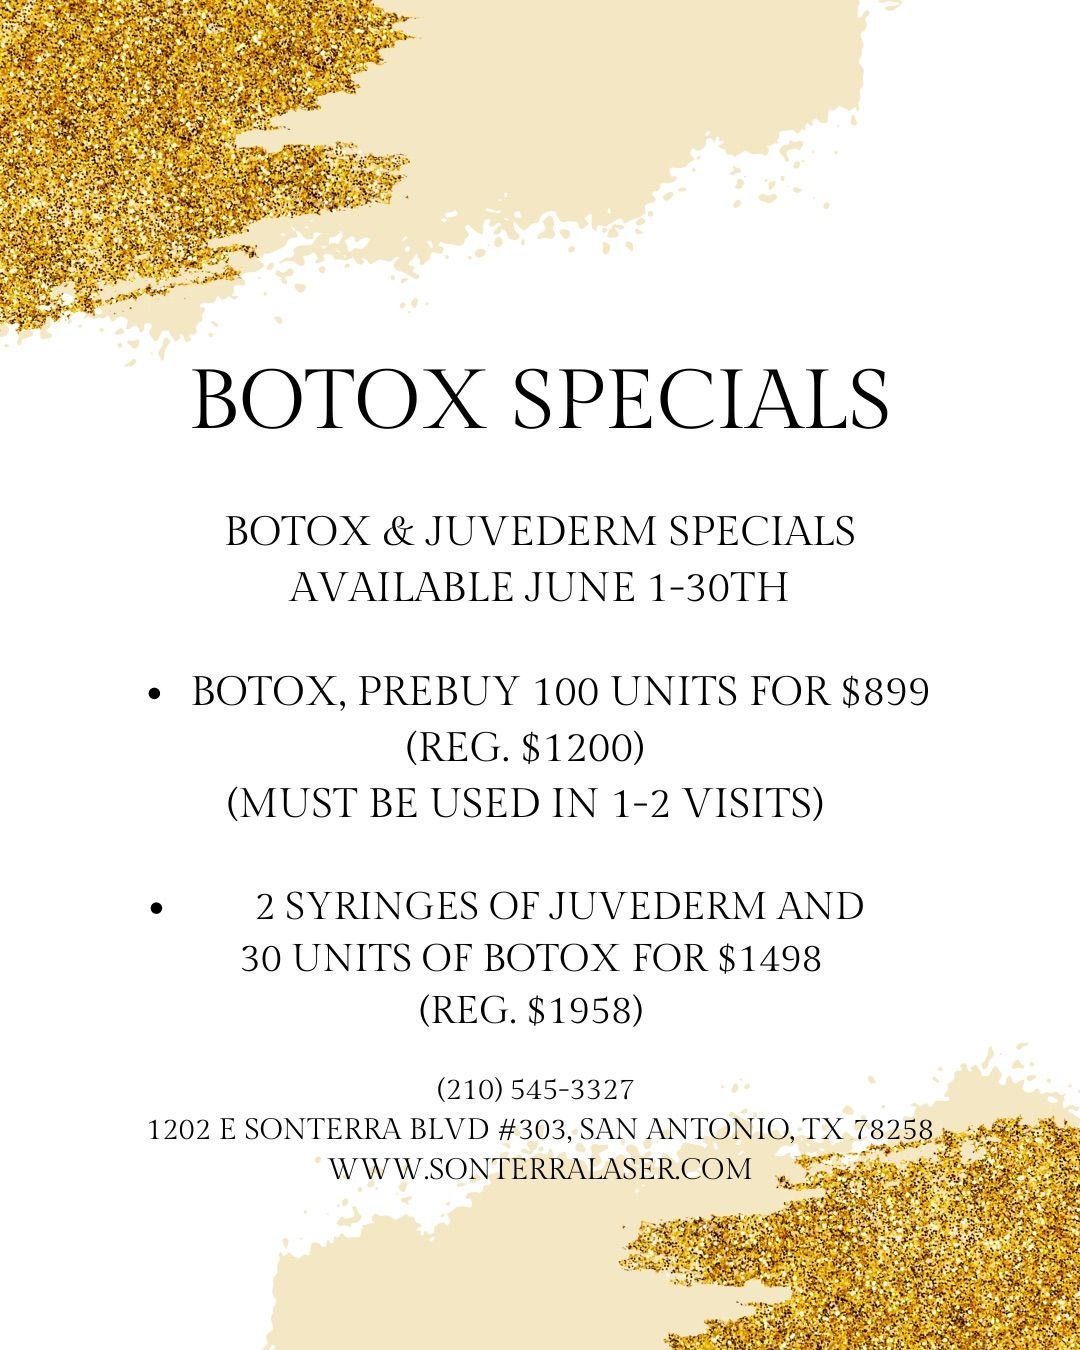 Get Summer-Ready with Exclusive Botox Specials